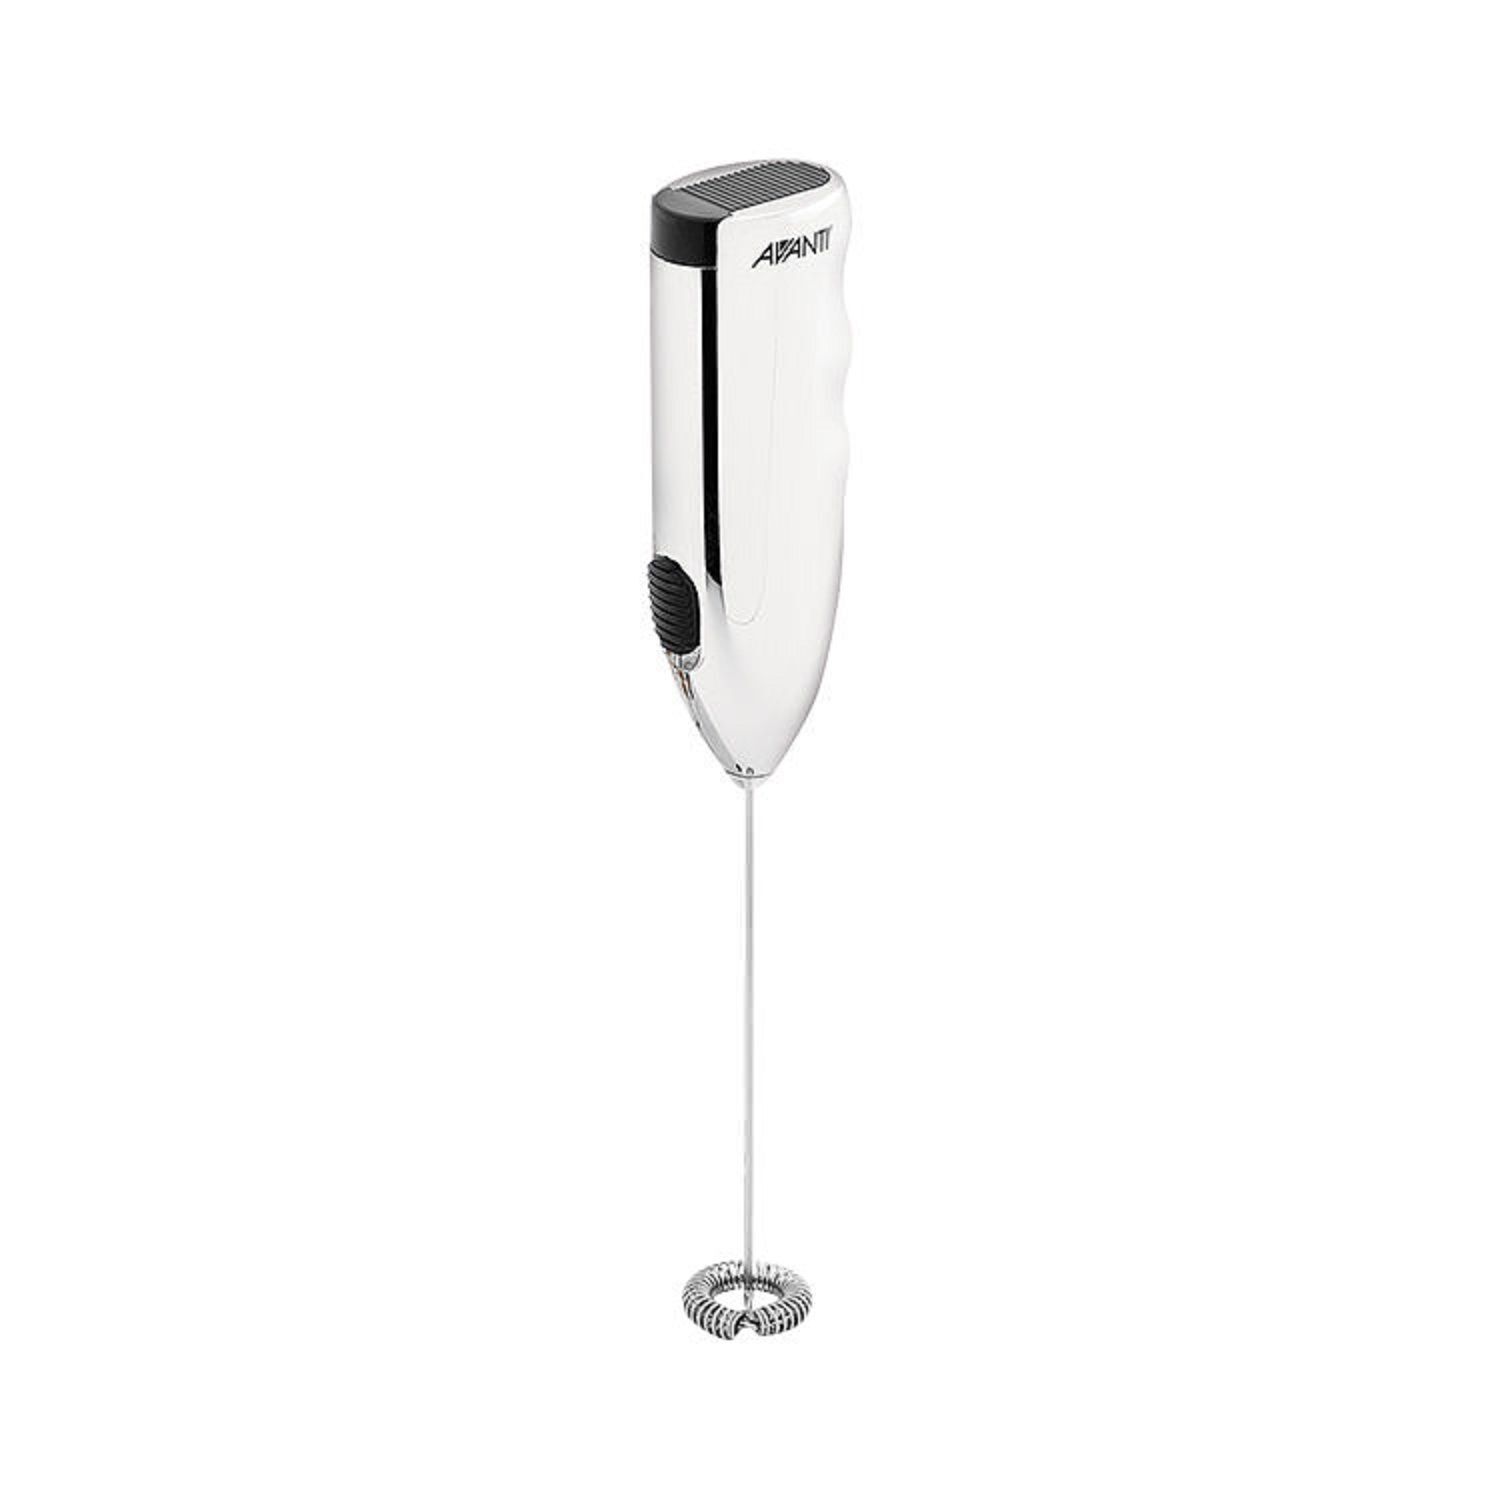 Avanti Little Whipper Milk Frother with Stand - Silver